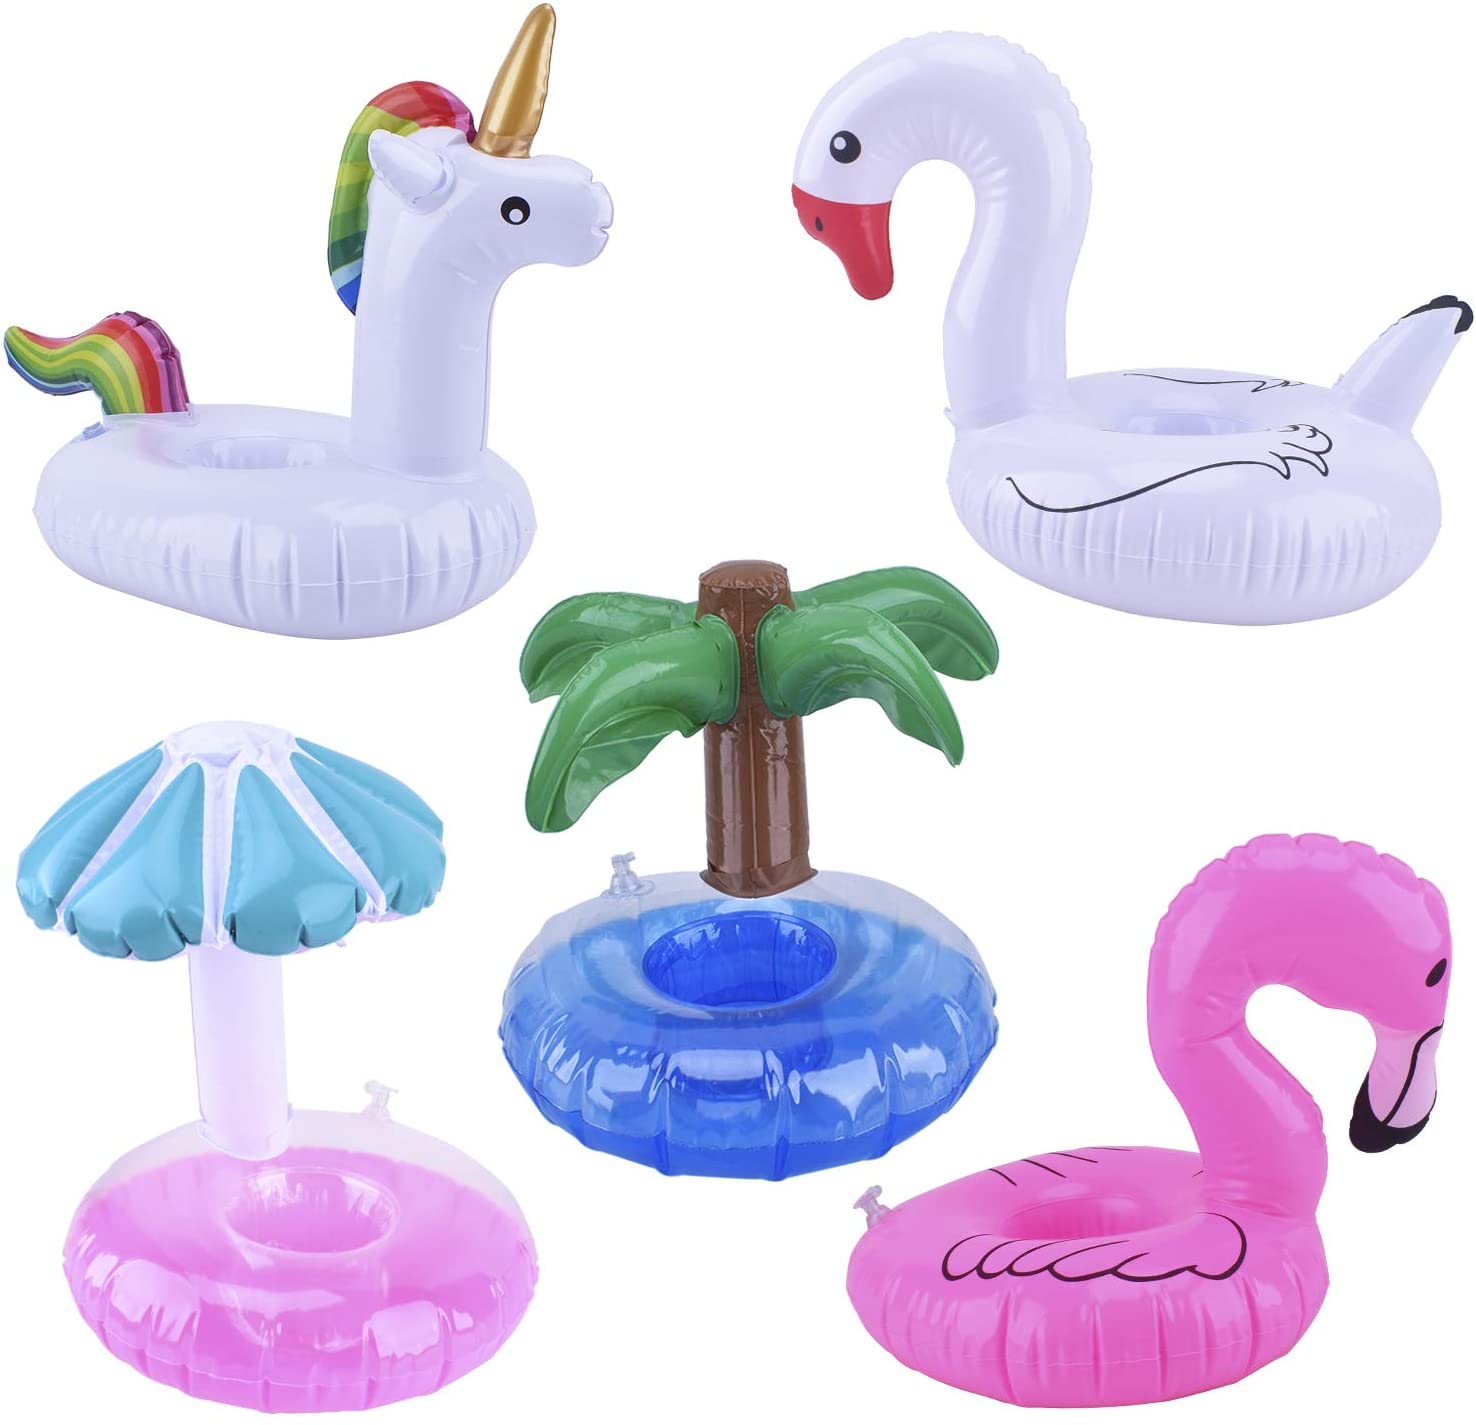 Blovec 5 Pack Inflatable Drink Holders Inflatable Cup Coasters Drink Floats Swimming Drink Holder Unicorn Flamingo Palm Tree Mushroom Swan for Pool Party (Colorful)